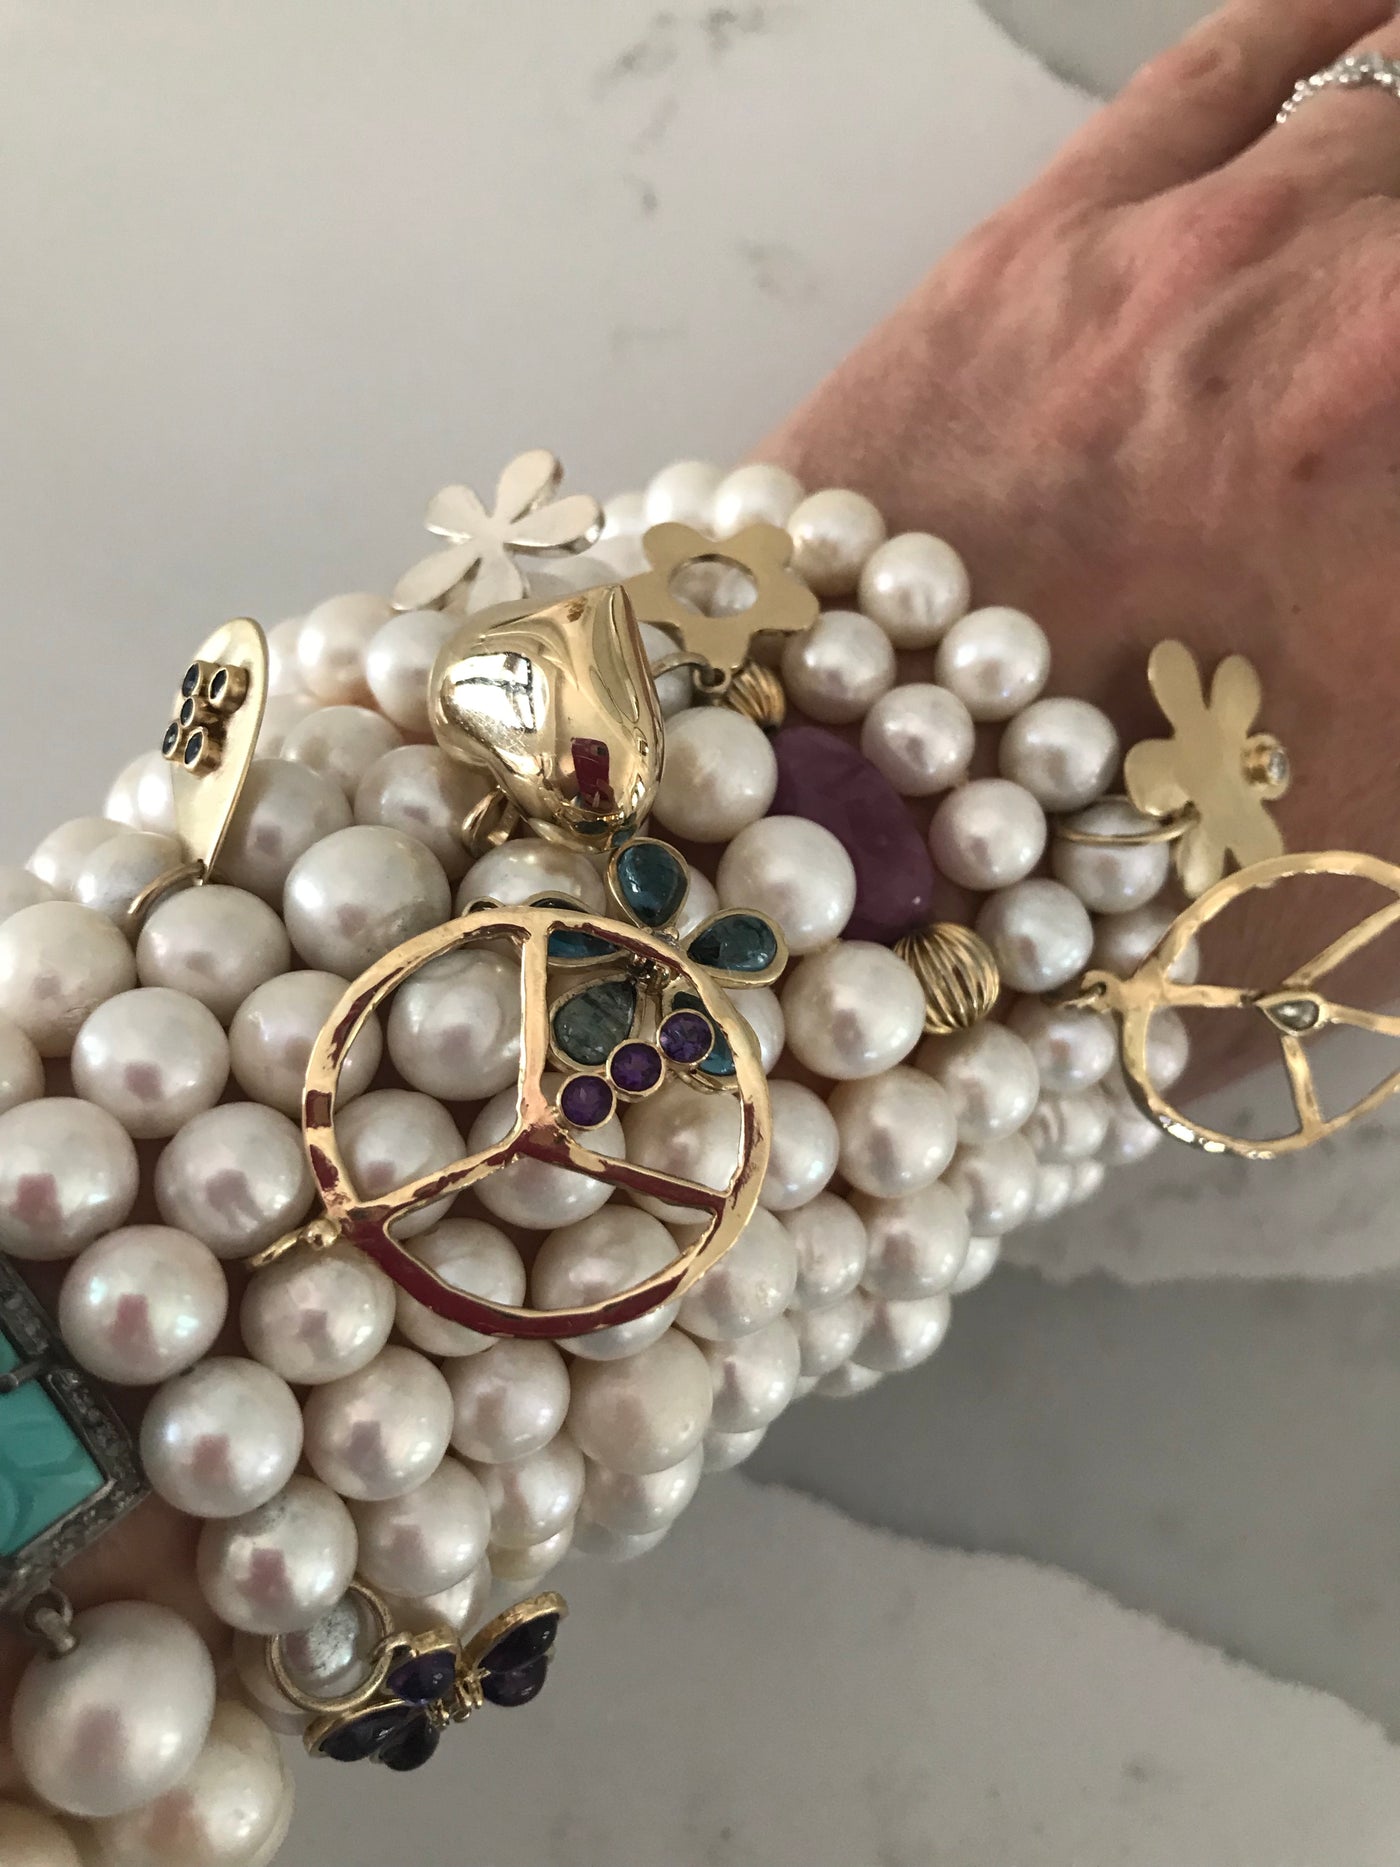 Pearl and Wildflower Charm Bracelet - Lauren Sigman Collection